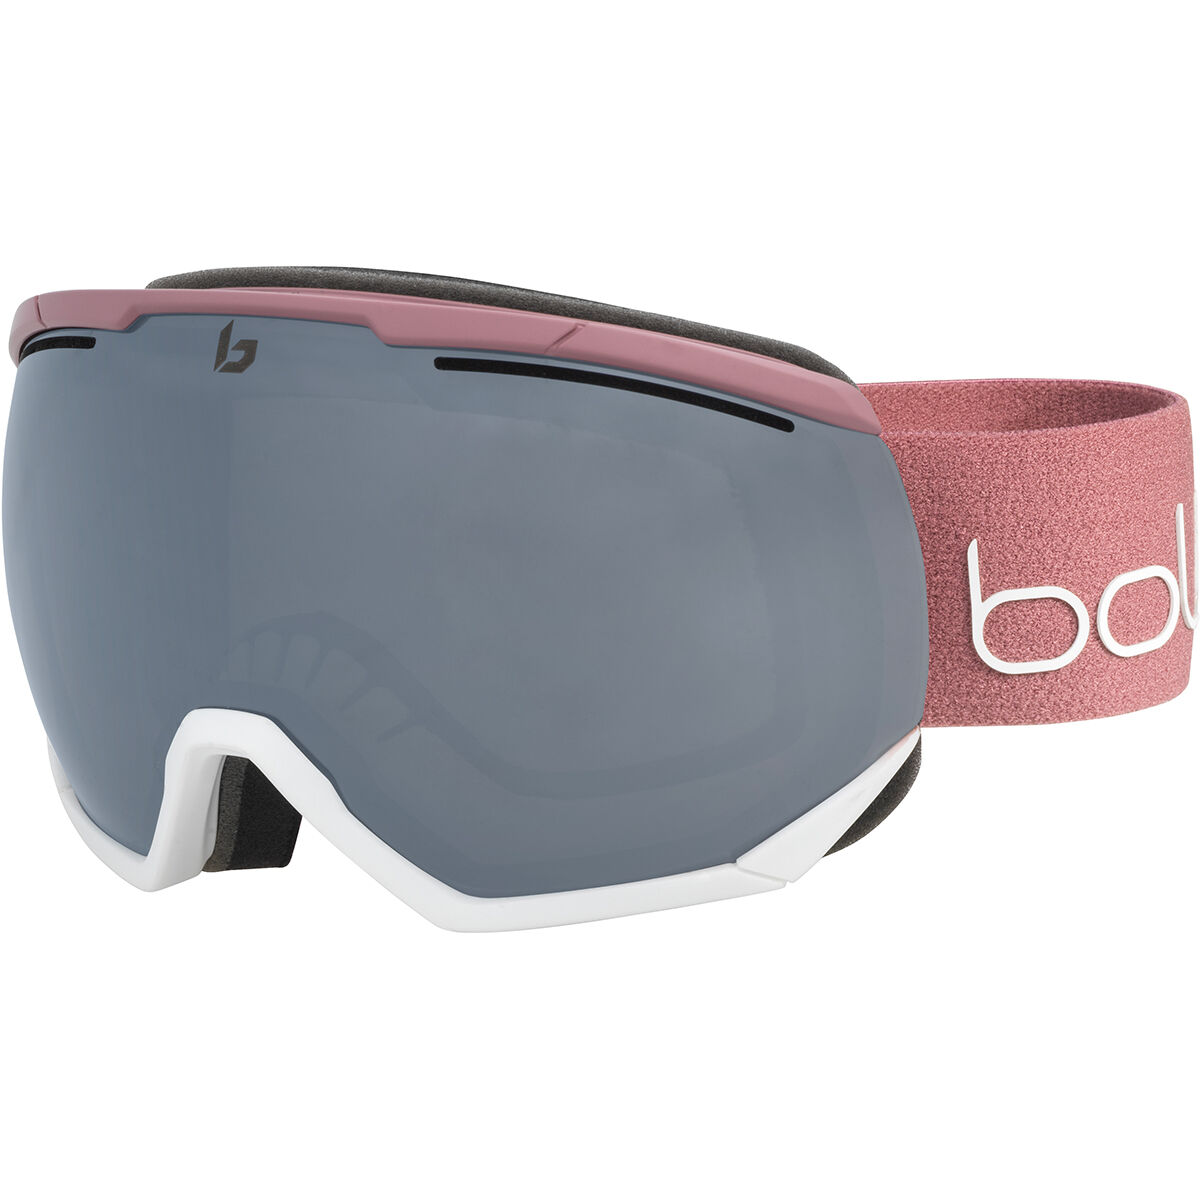 Details about   BOLLE Ski Goggles NEBULA Women's Small Fit Shiny Pink/ Vermillon Gun 20429